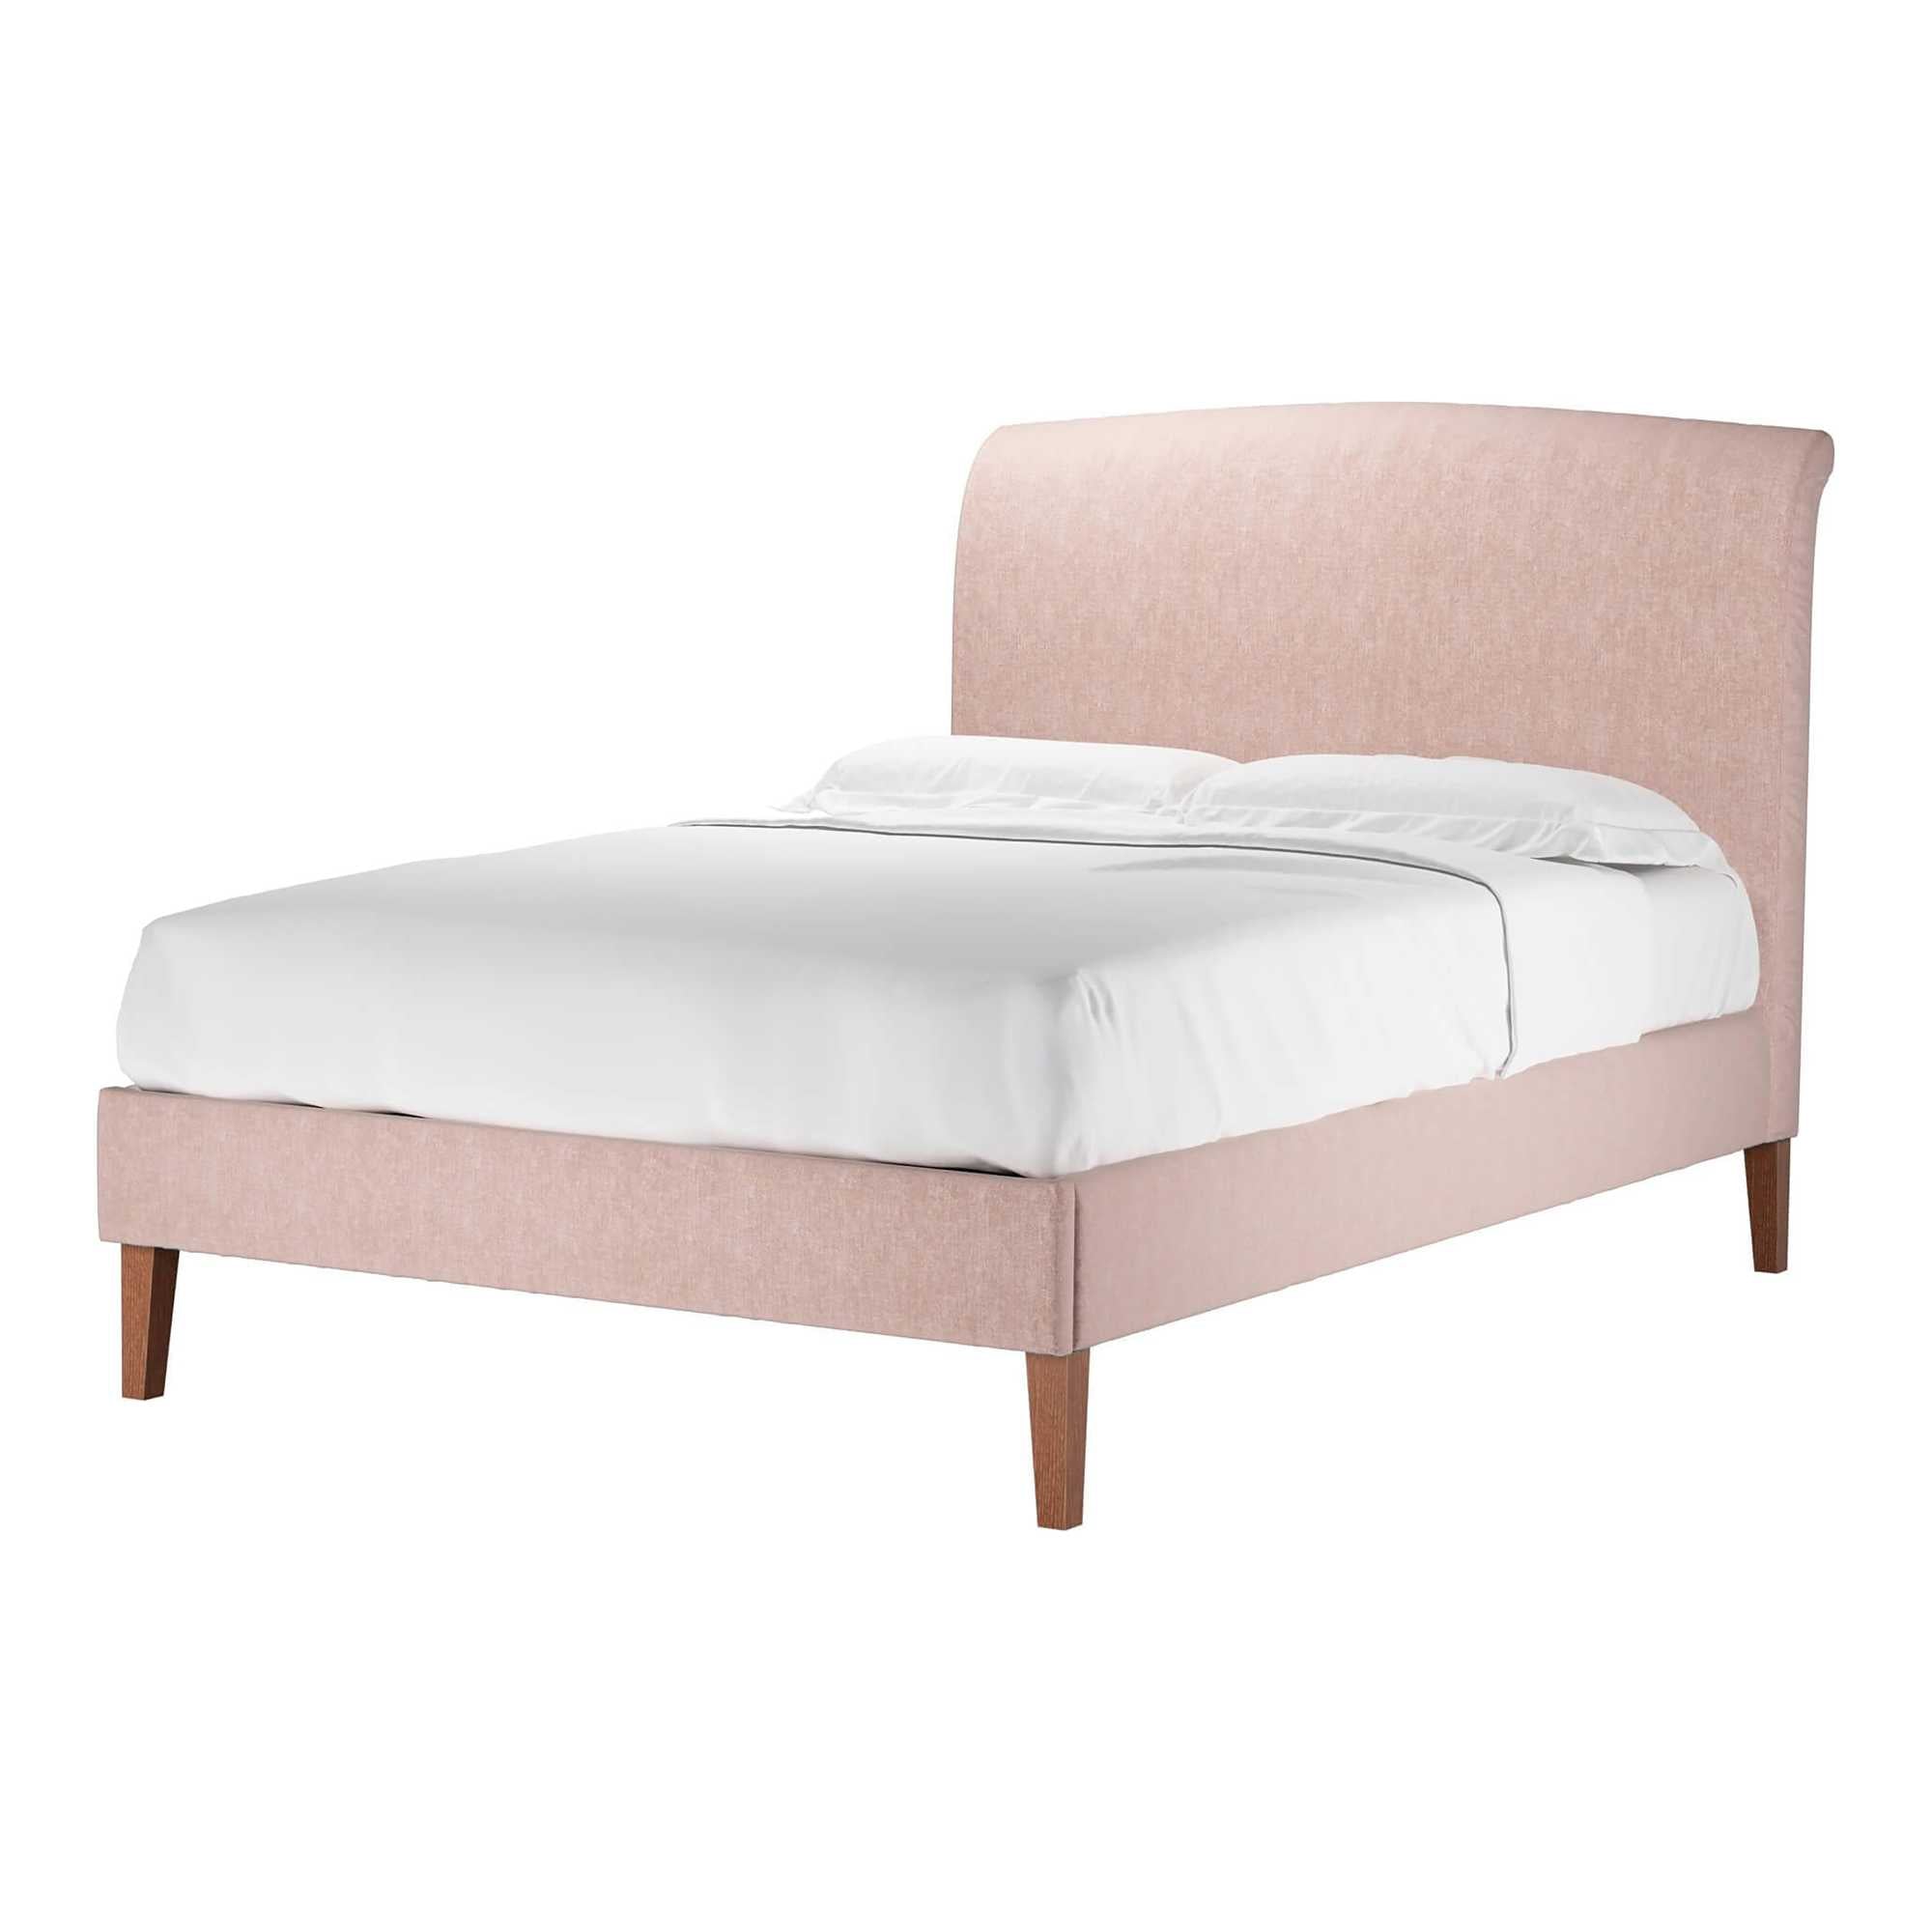 Thea Pavilion Pink Brushstroke Bed - Double Size